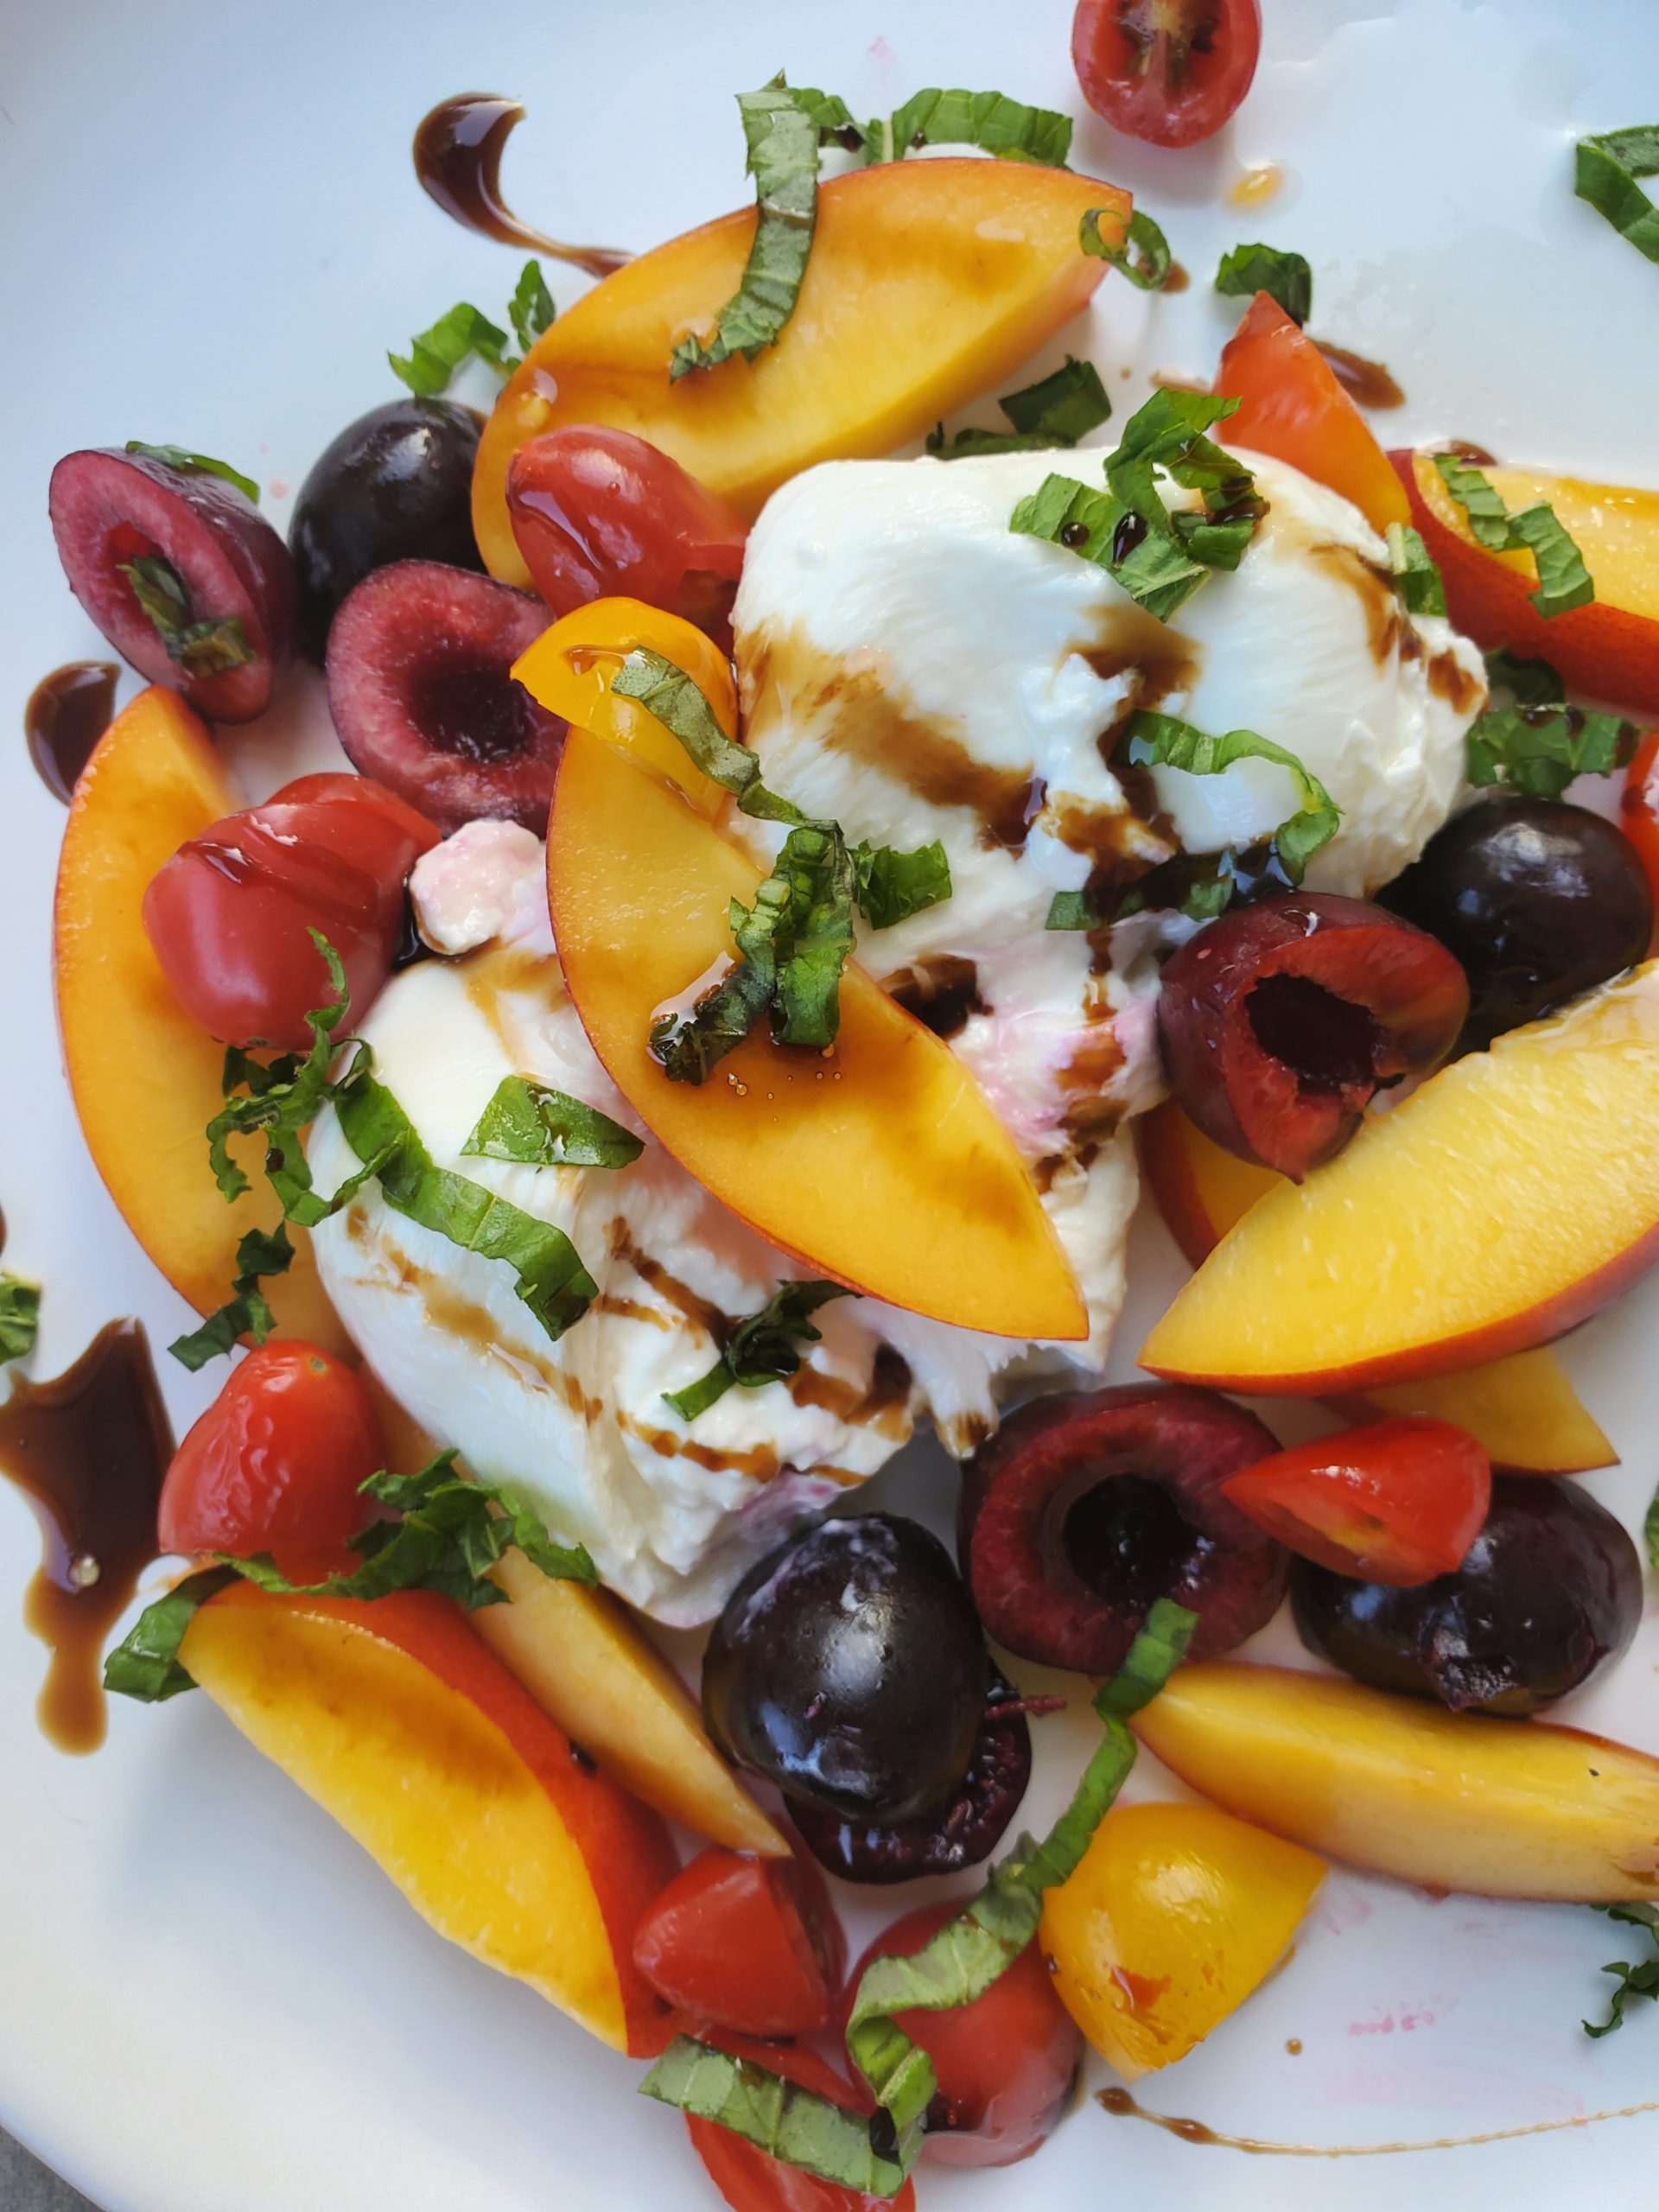 Plate with burrata cheese, nectarine, cherries, mint, basil, and a drizzle of balsamic glaze